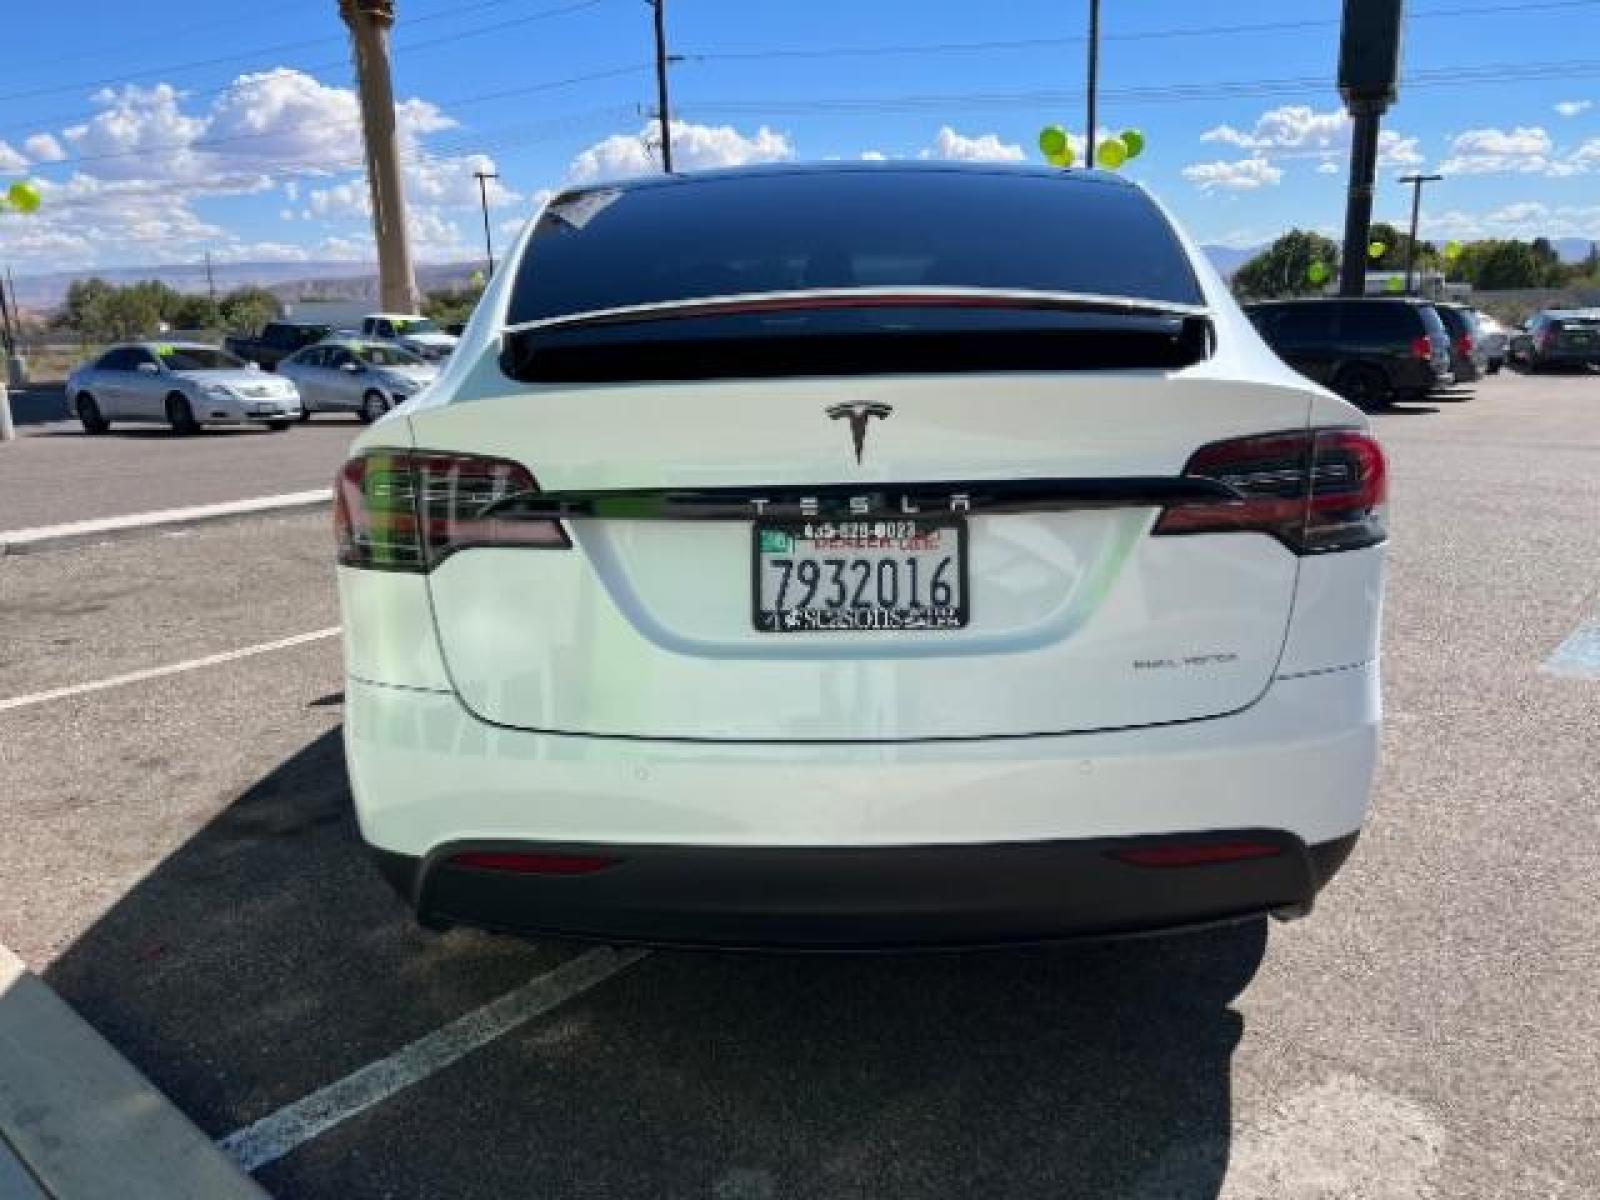 2019 Pearl White Multi-Coat /All Black, leatherette Tesla Model X Standard Range (5YJXCAE21KF) with an ELECTRIC engine, 1-Speed Automatic transmission, located at 1865 East Red Hills Pkwy, St. George, 84770, (435) 628-0023, 37.120850, -113.543640 - AWD, 7 Seats, Autopilot, Raven, Cold weather package, Adaptive suspension, Tow hitch, 2 remotes, FSD computer 3.0 upgrade. Gets 270 miles on a full charge. Black chrome delete vinyl (removeable). This is a beautiful 1 owner MX for way less money and less waiting compared to ordering from Tesla. Bump - Photo #8